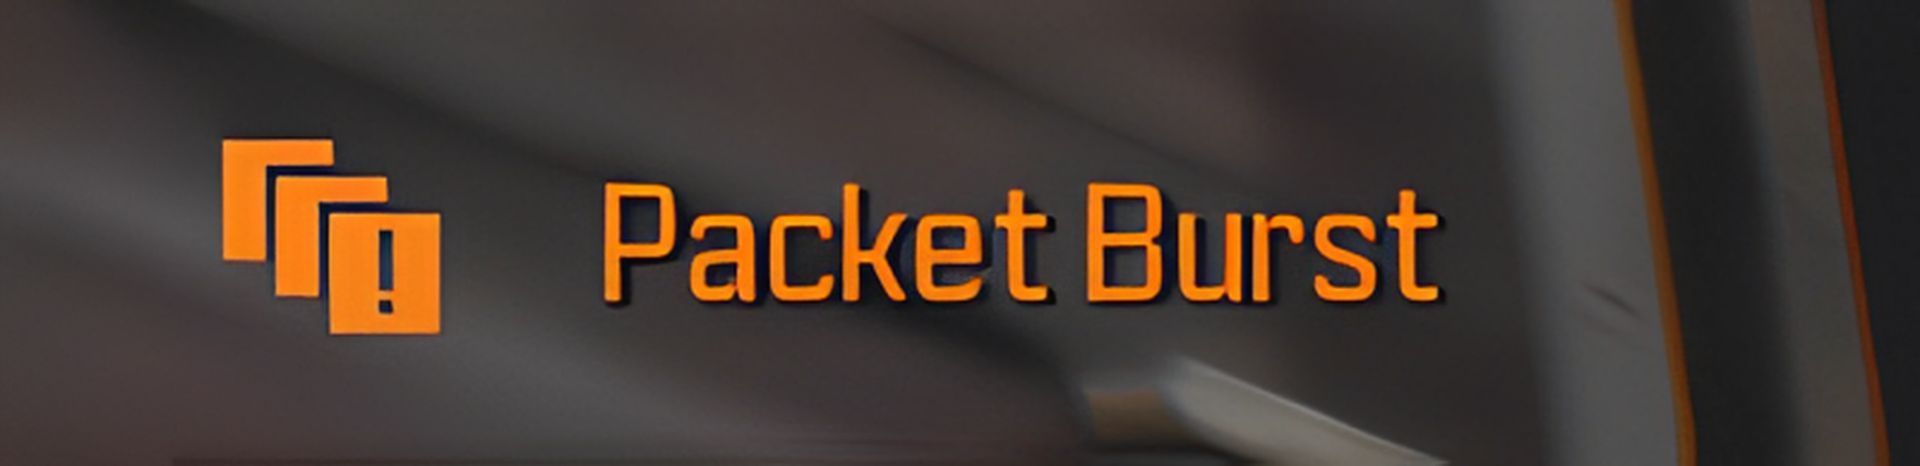 How to fix MW3 Packet Burst issue